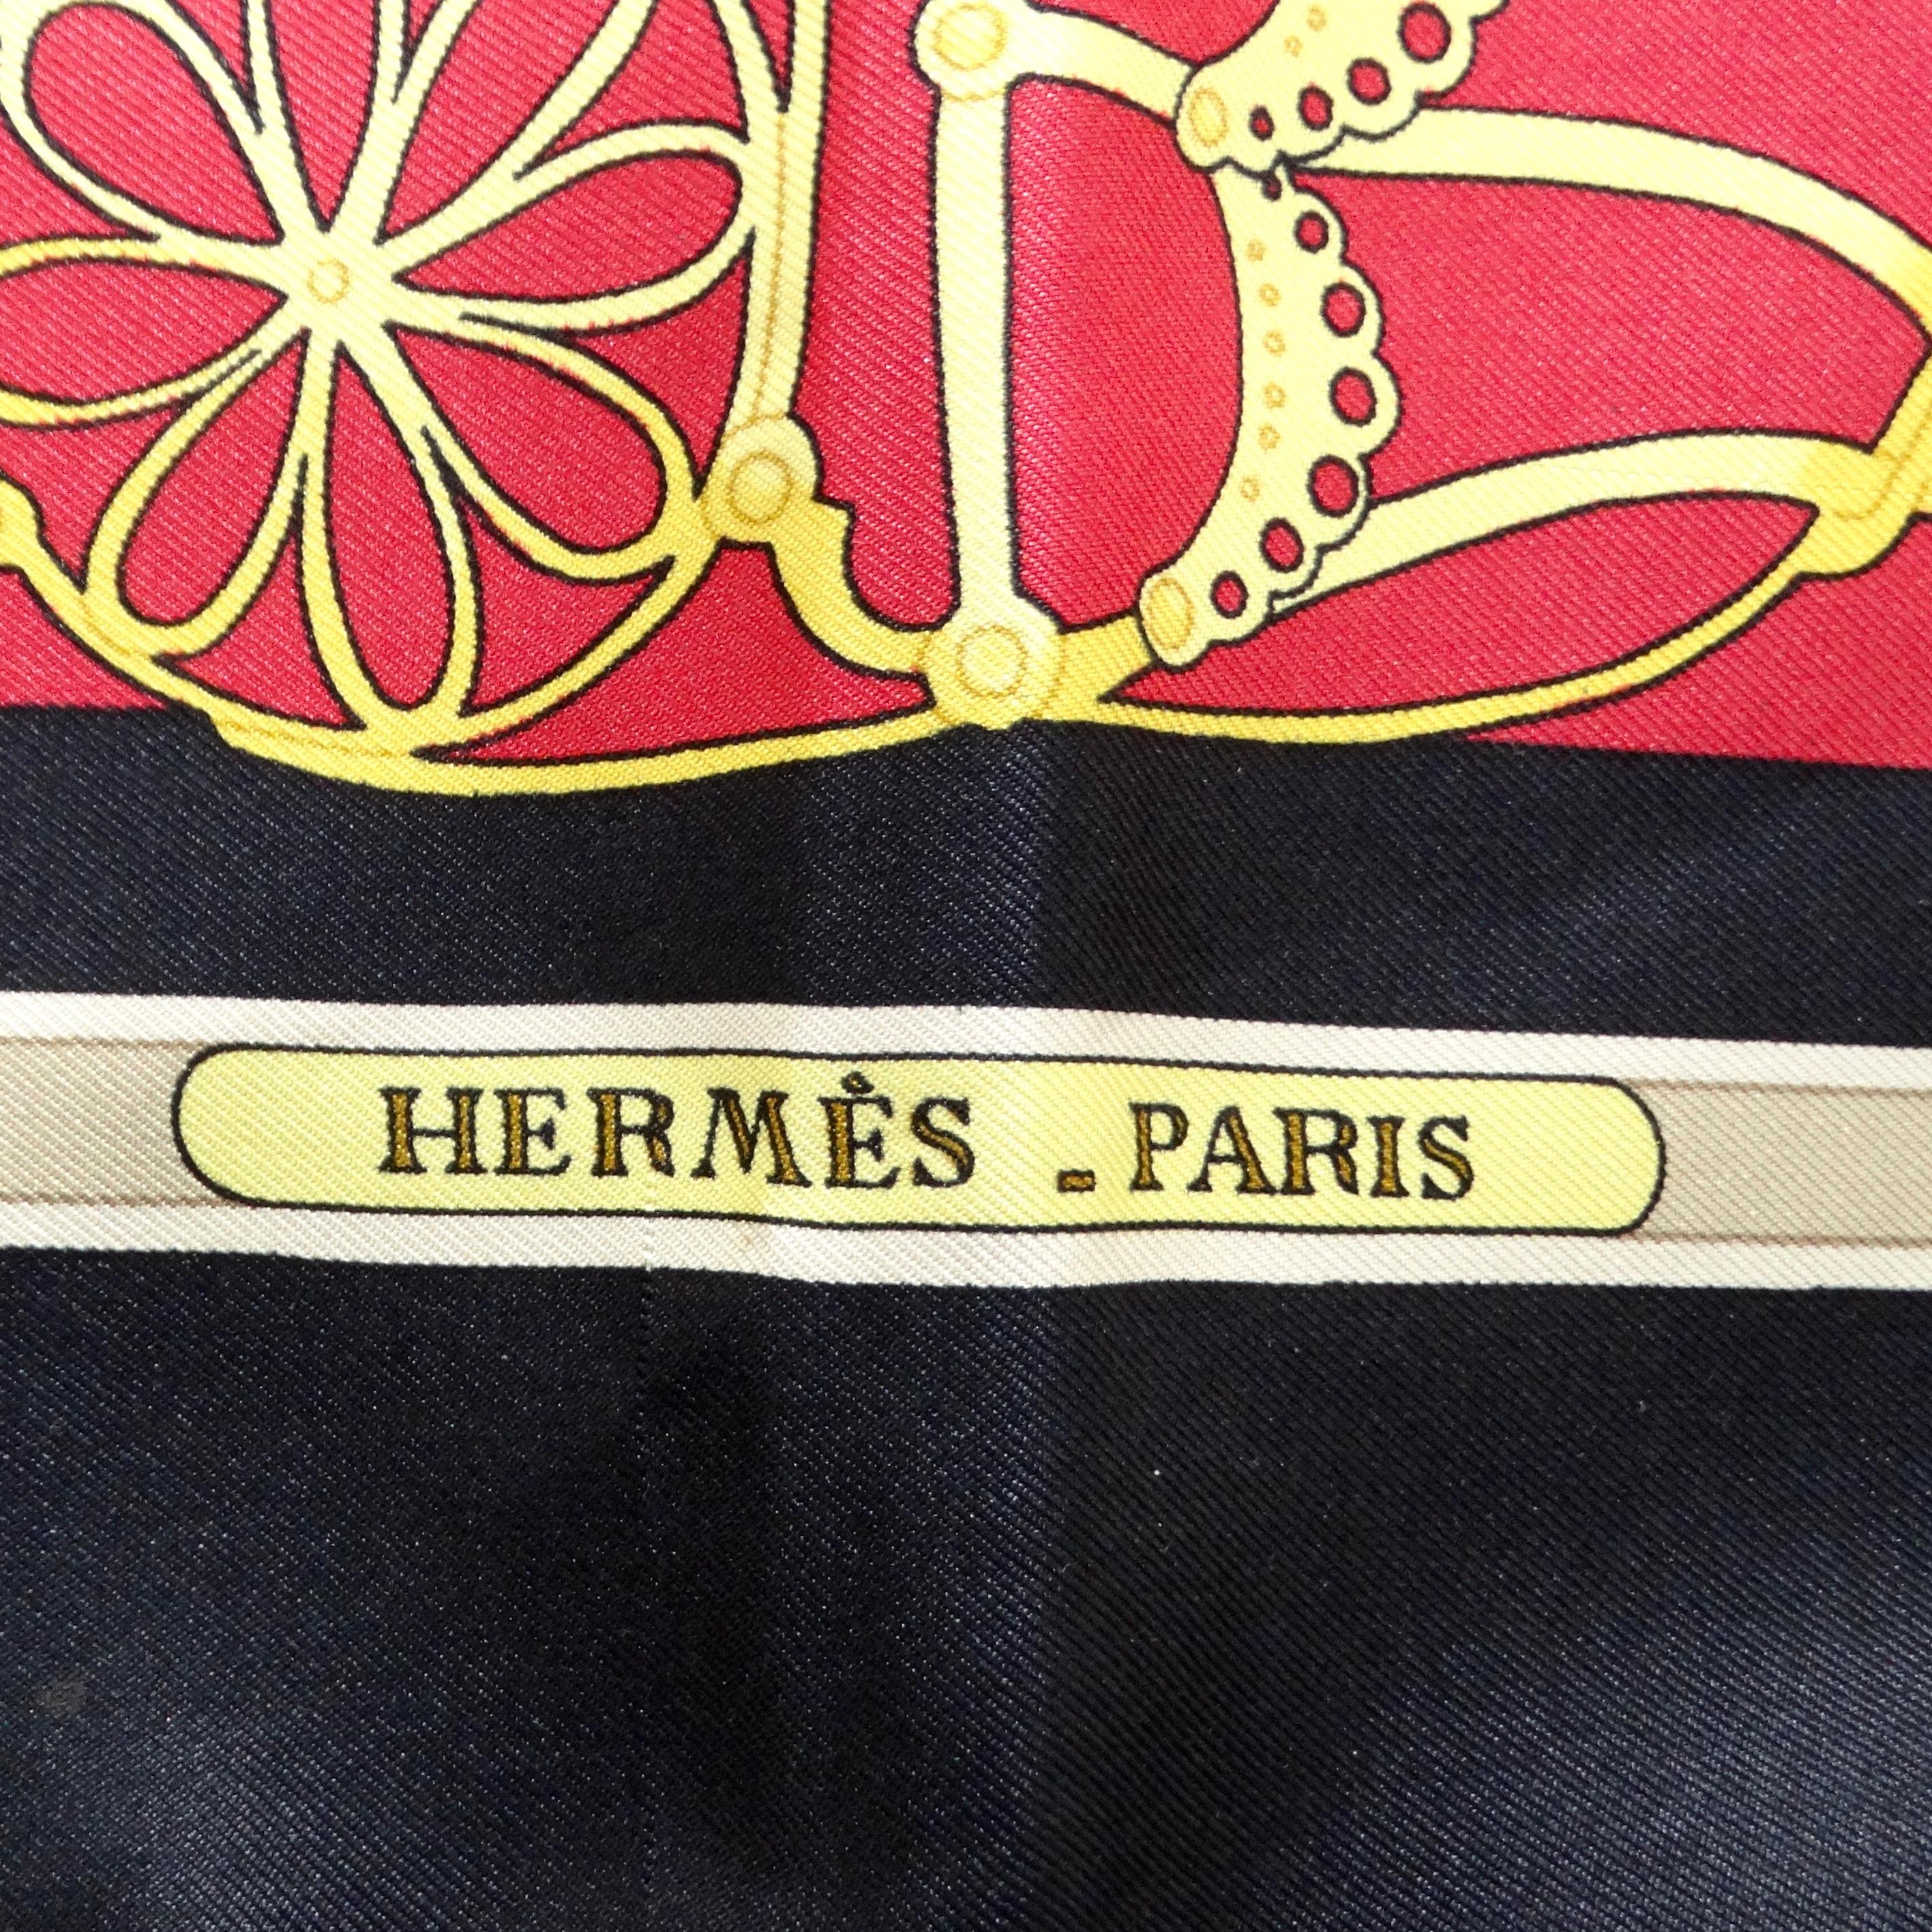 Hermes Les Muserolles Silk Scarf In Excellent Condition For Sale In Scottsdale, AZ